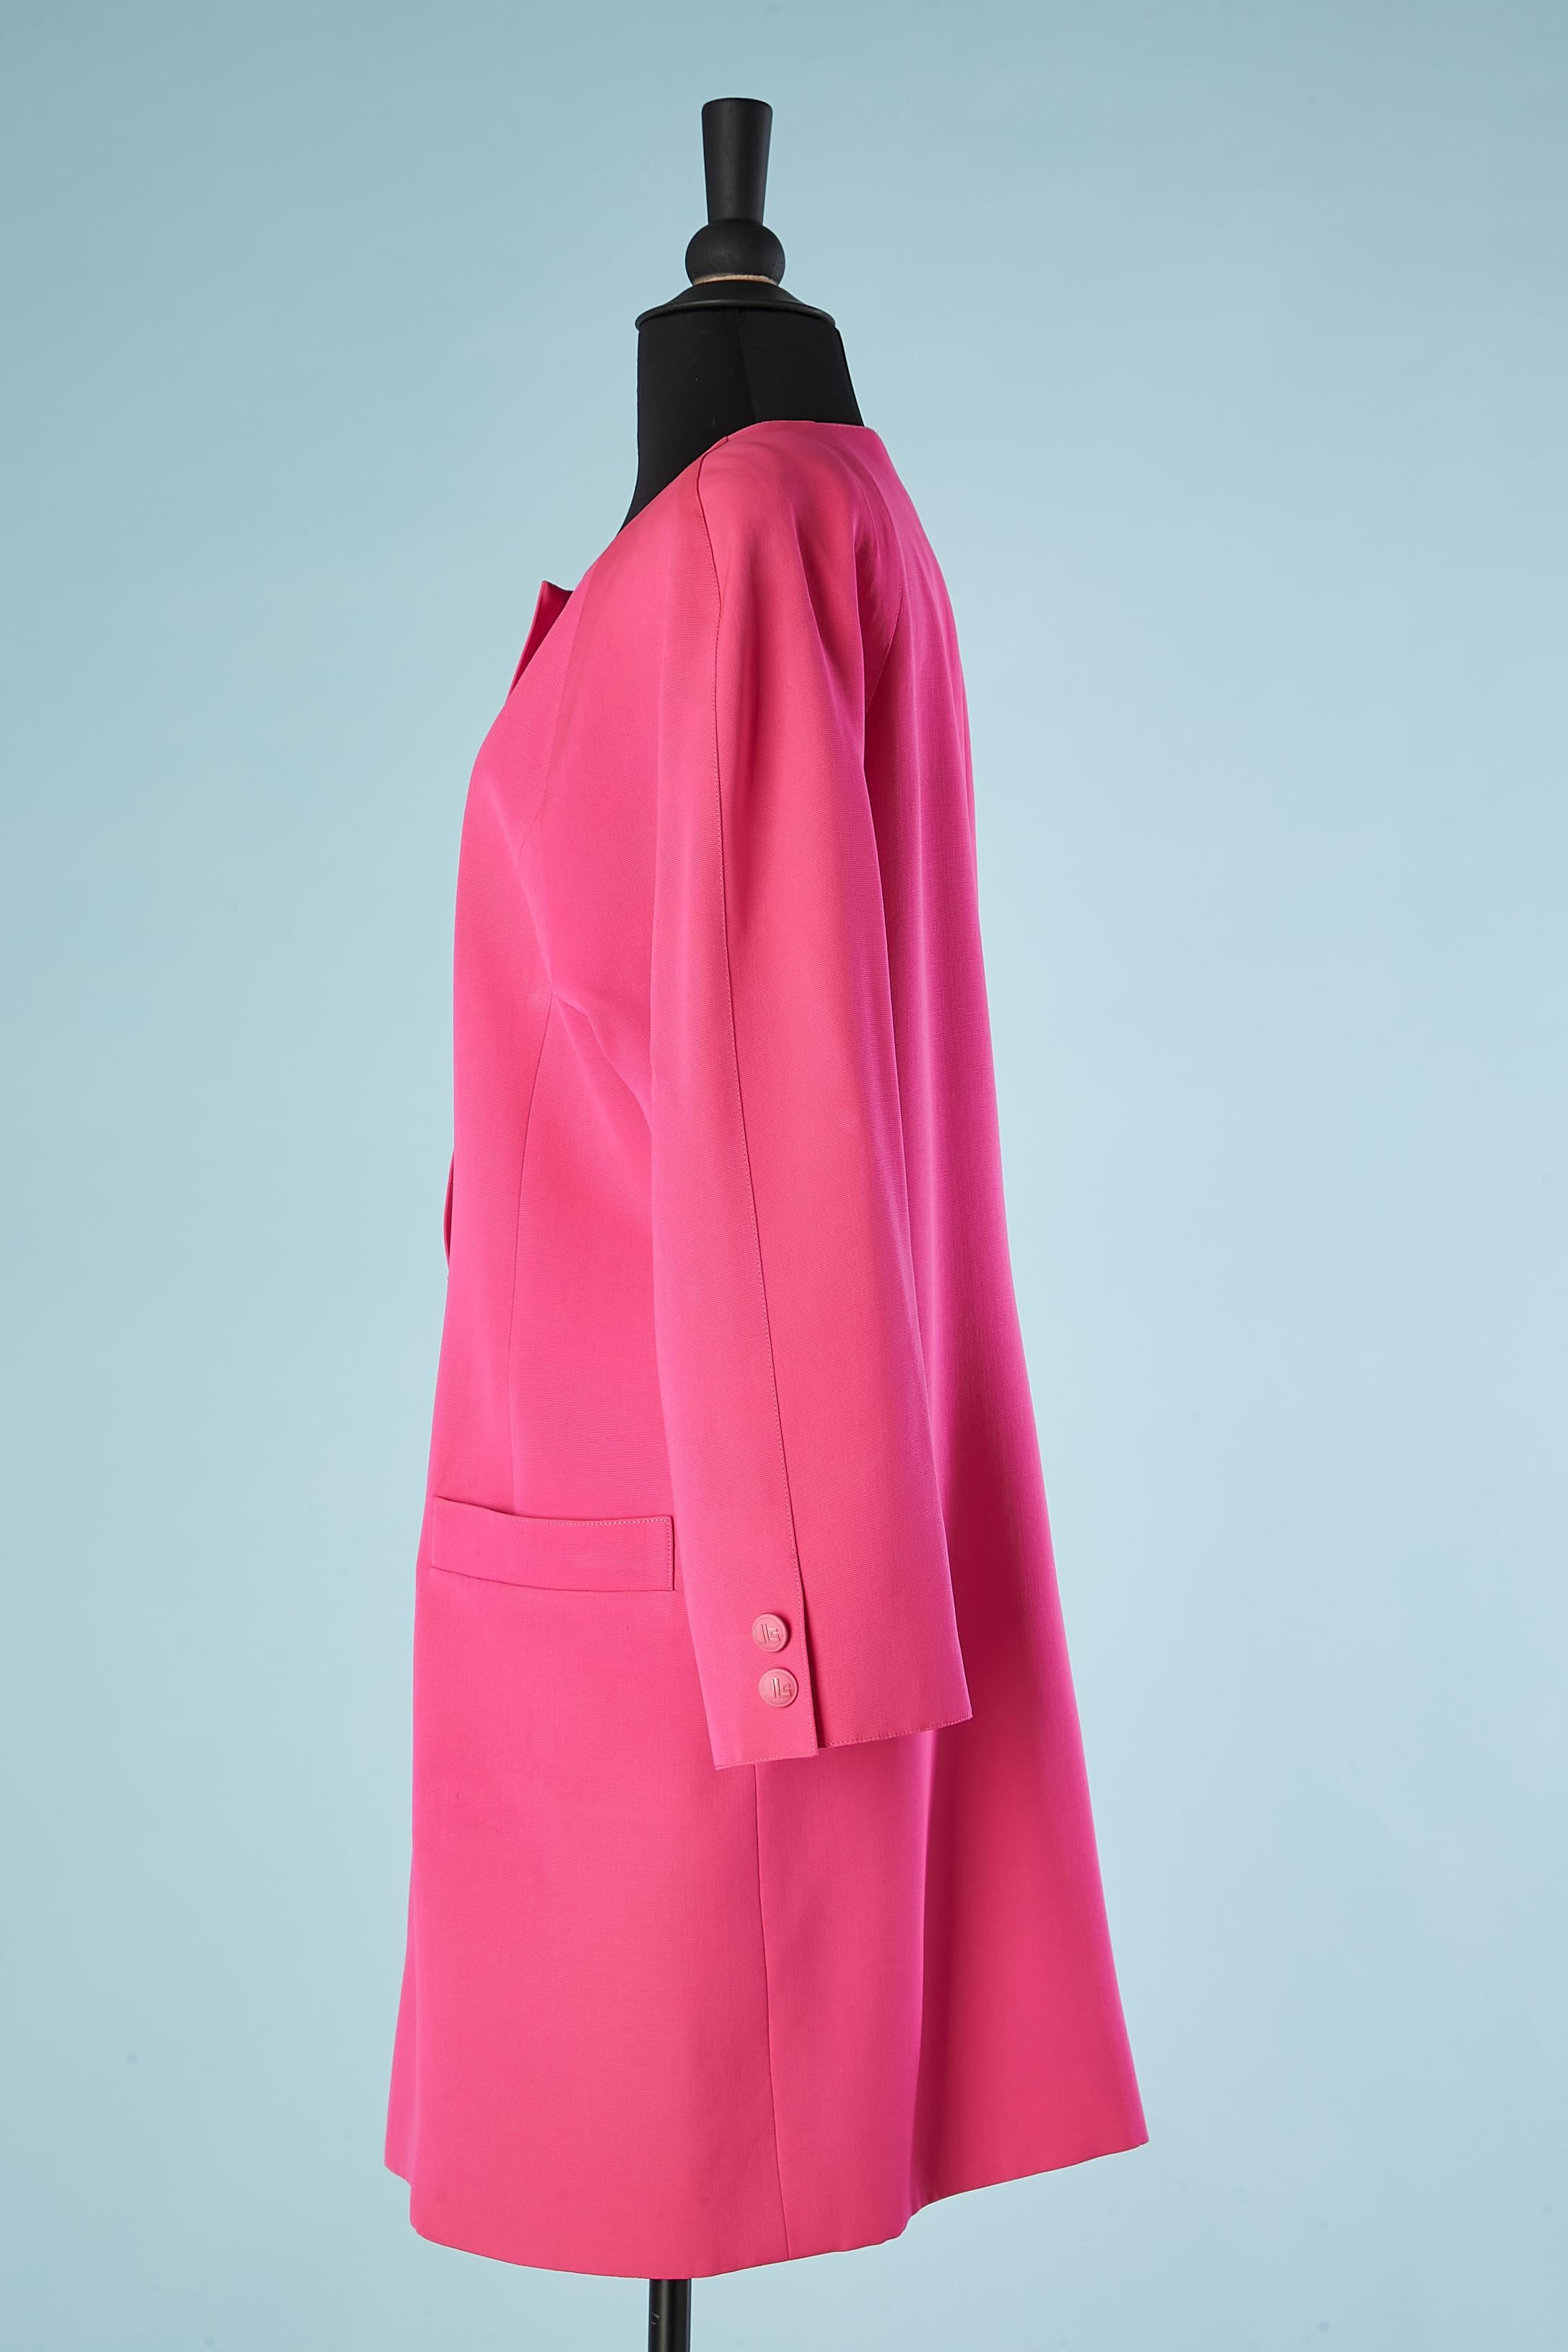 Women's Single-waisted pink cocktail jacket with branded button Scherrer Boutique  For Sale